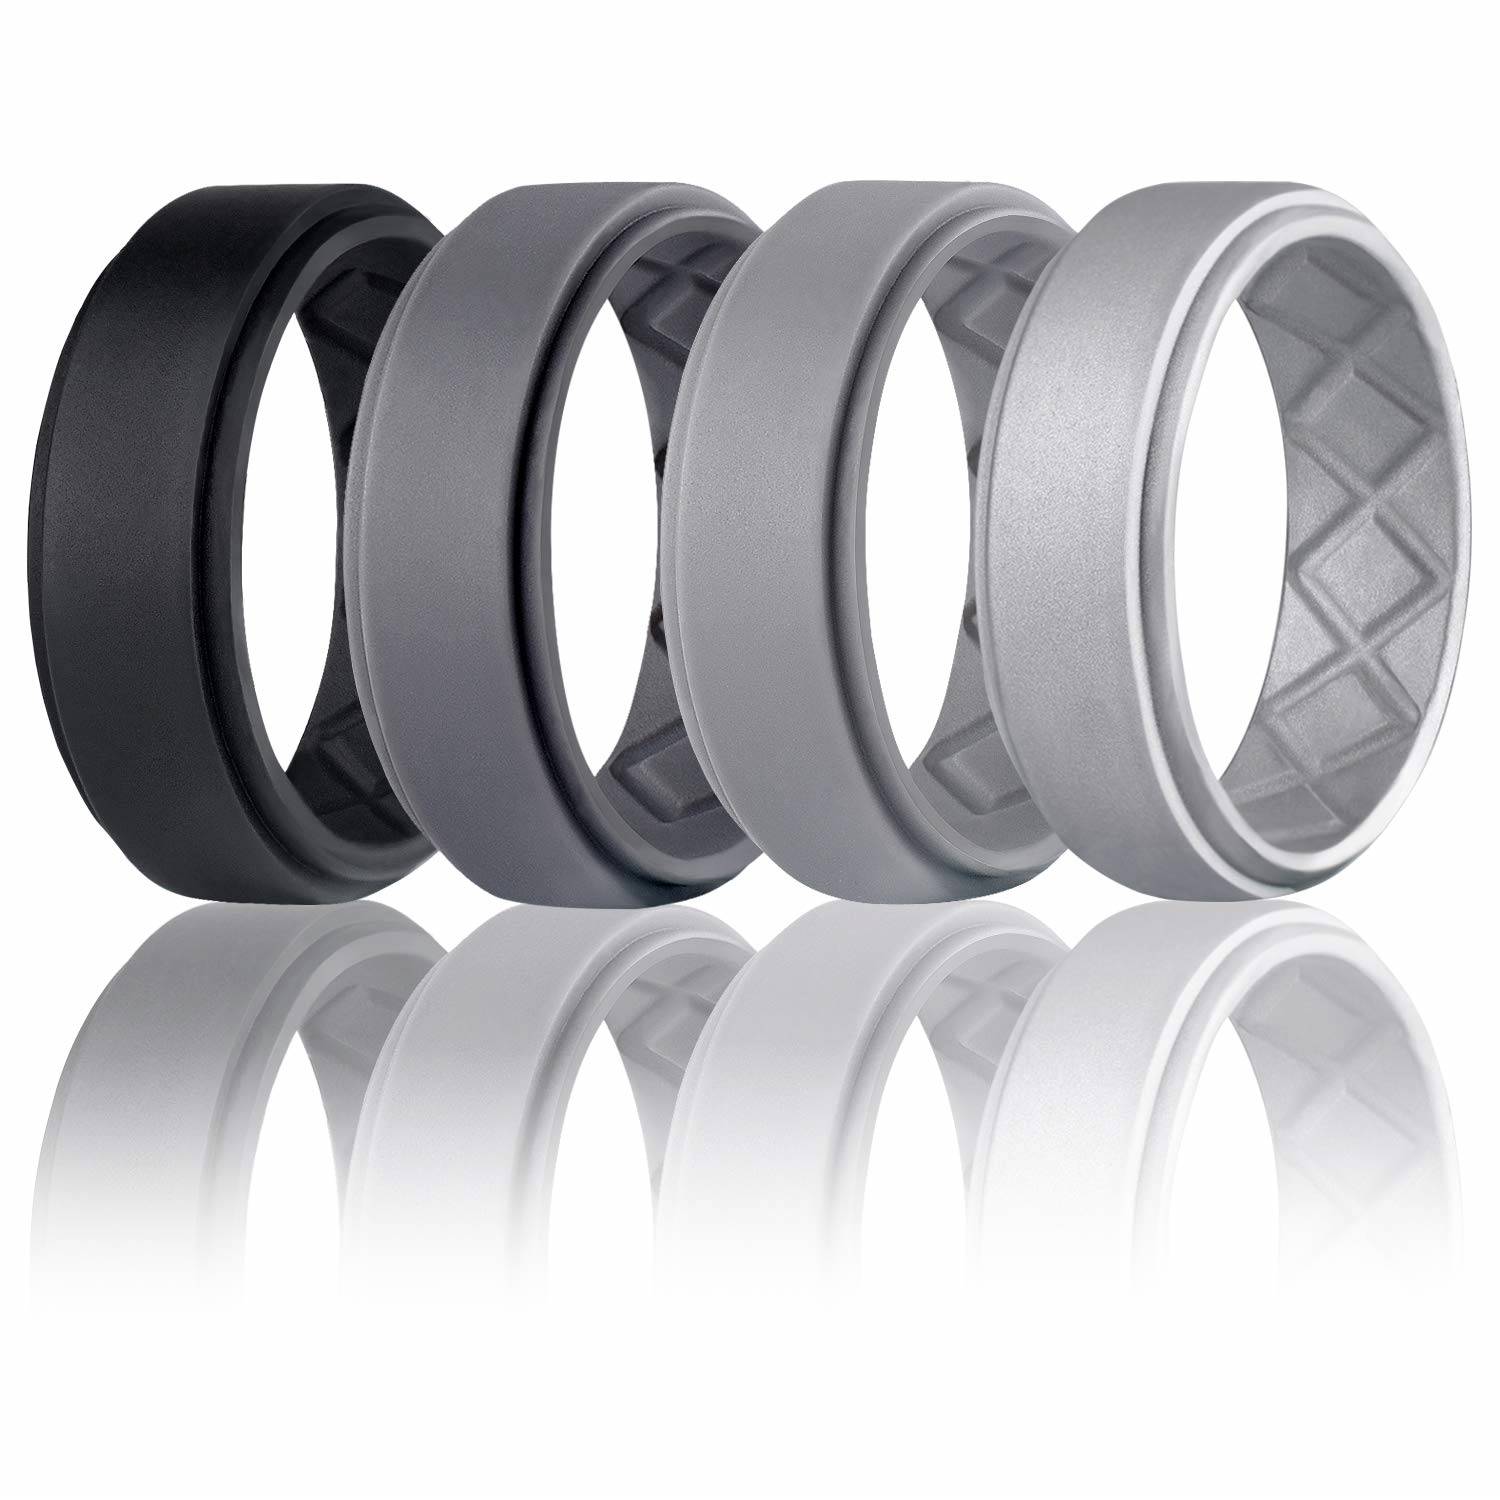 CHARCOAL SILICONE WEDDING BAND/WORKOUT RING FOR MEN/UNISEX-RINGS FOR GYM/WELDING